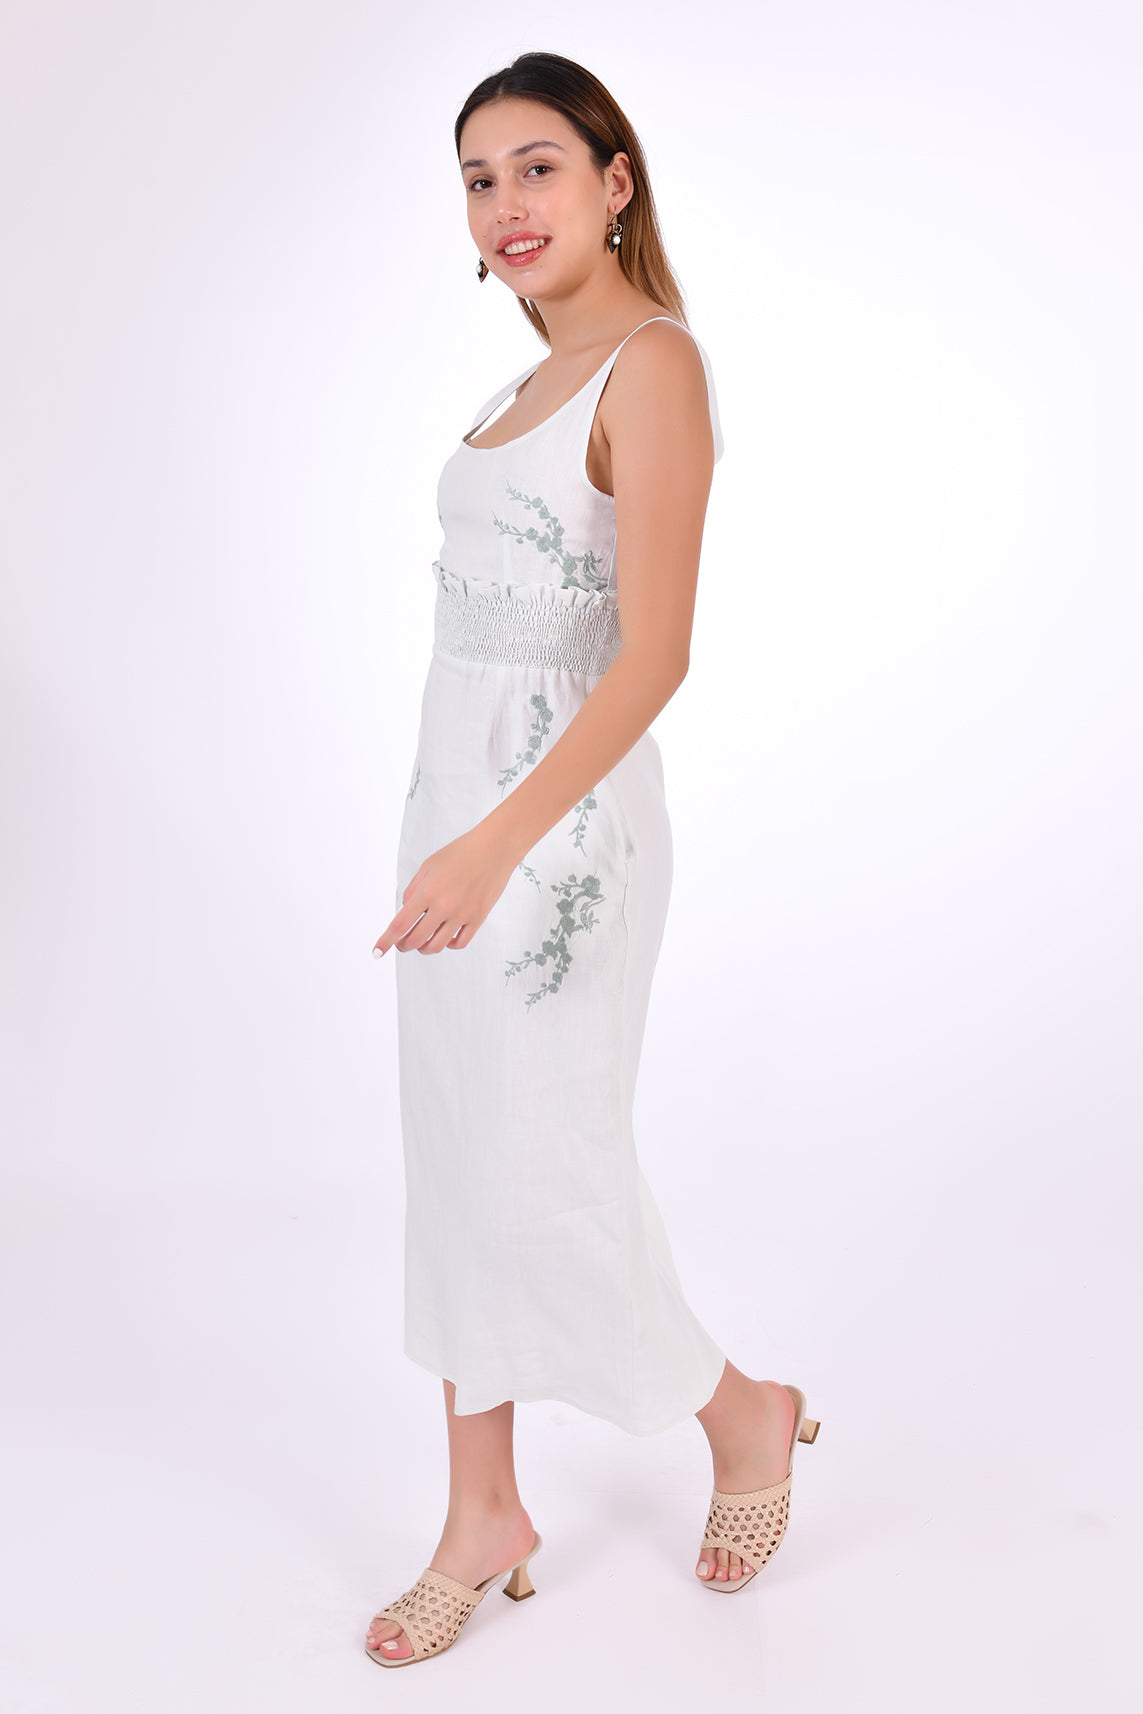 Fanm Mon BAHAR Midi Dress Side View. Sleeveless Midi Linen Sheath Dress. Featuring a smocked waistband with ruffle trim and hand-embroidered floral pattern.